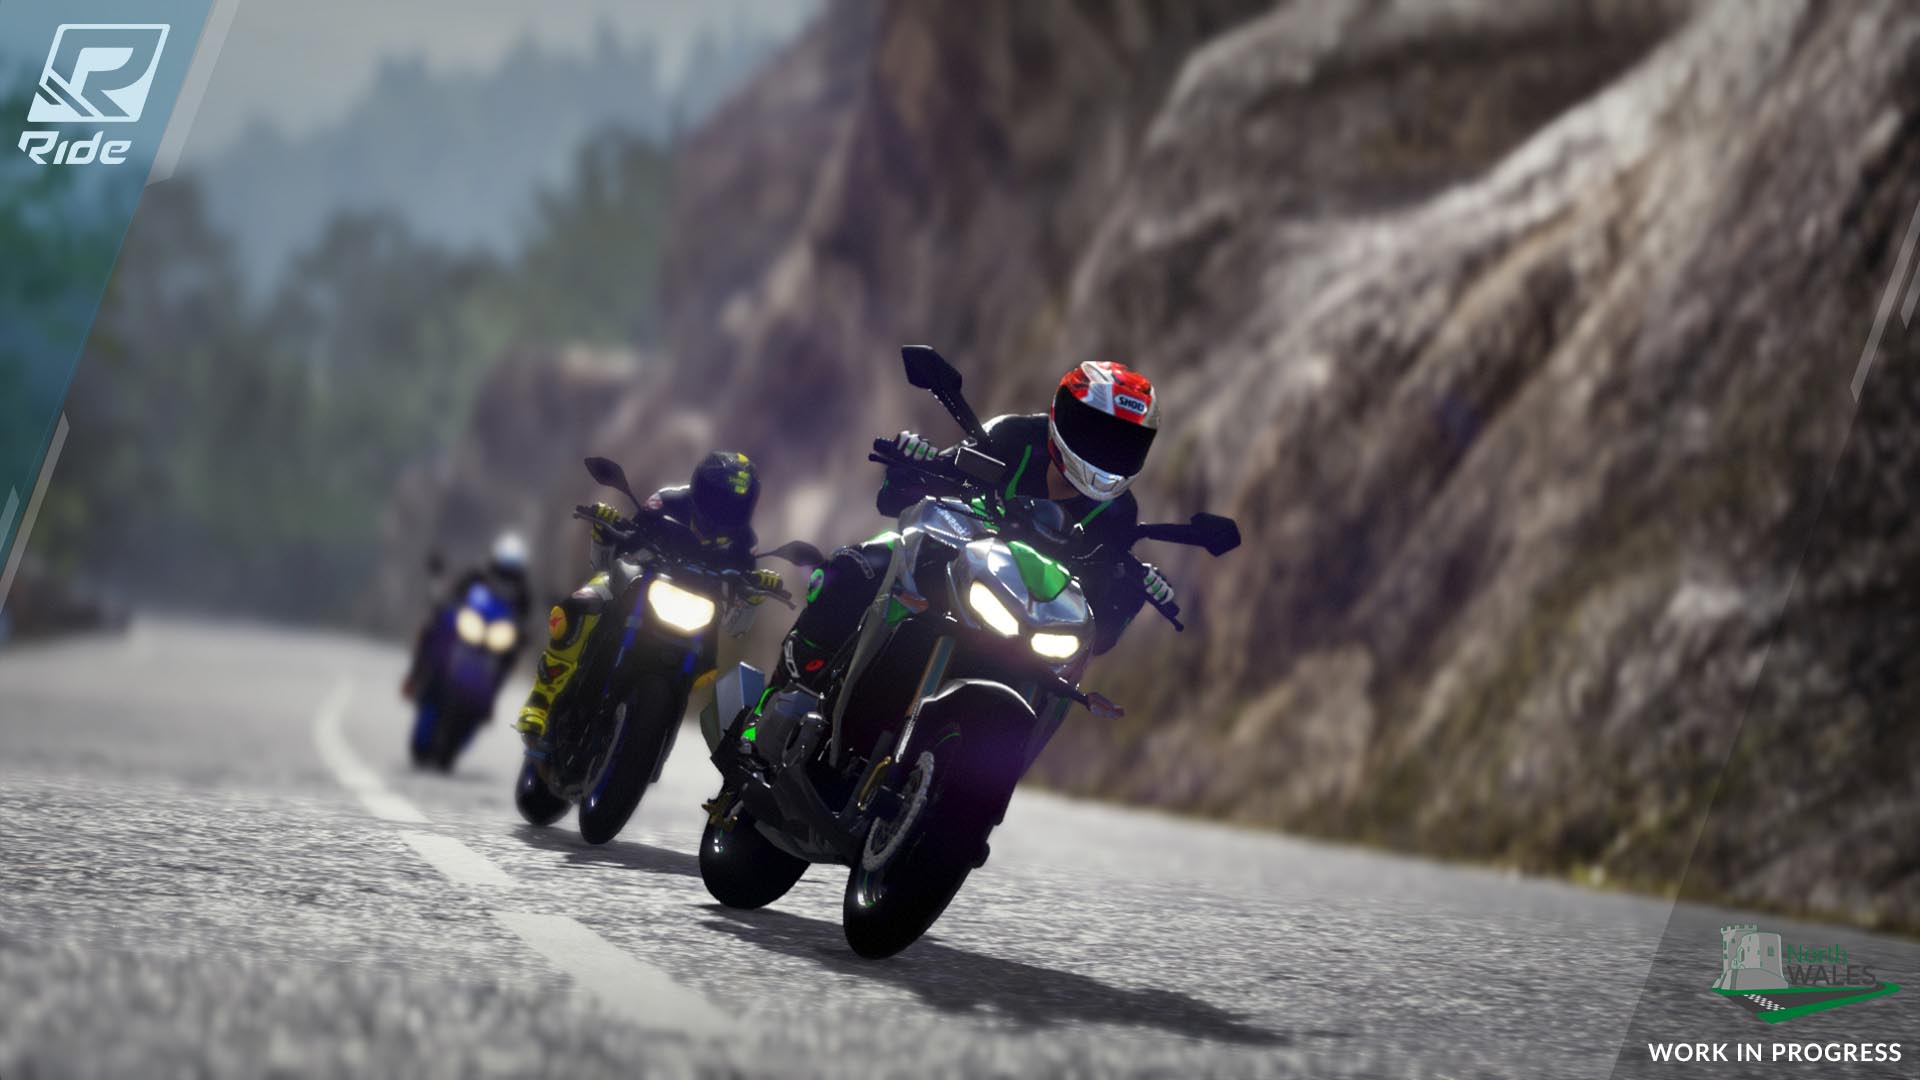 If you want to race using street bikes, or more customization, this is the one for you. The handling and gameplay is more forgiving compared to <i>MotoGP</i>, and rather than following the career of a current MotoGP rider, you create your avatar from scratch and your bike is completely customizable. | <b>For:</b> PC, PS4, Xbox One, PS3, Xbox 360